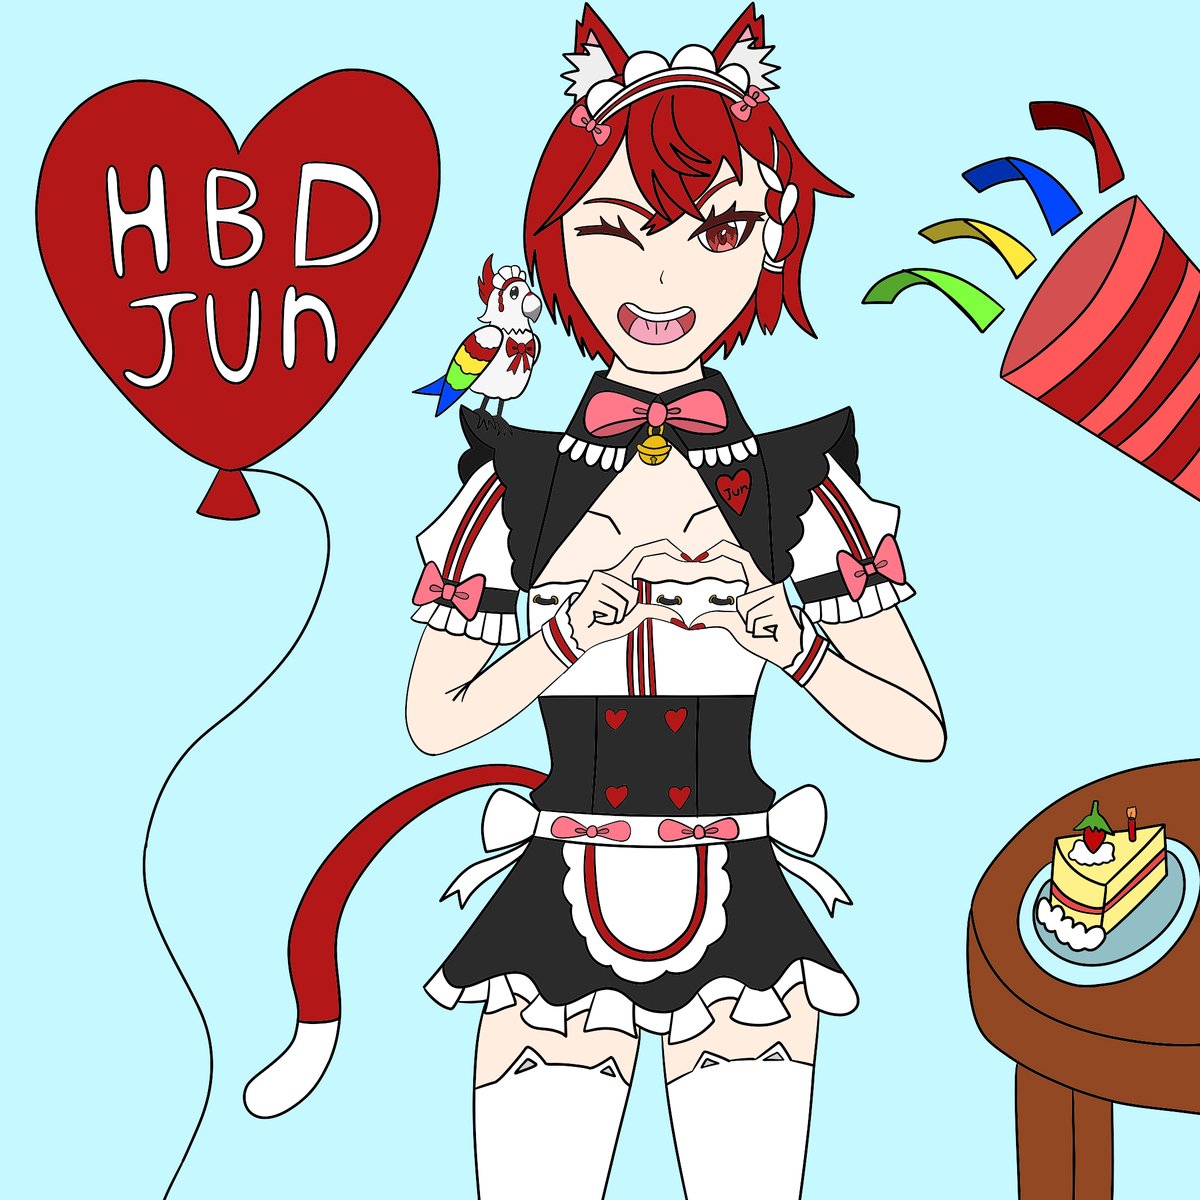 HBD JUN! since you did the vanilla reveal, i decided to draw you in a nekopara outfit, hope you like the maid jun and unagi. Jun proving he is one of the girls as always!   #Parrart